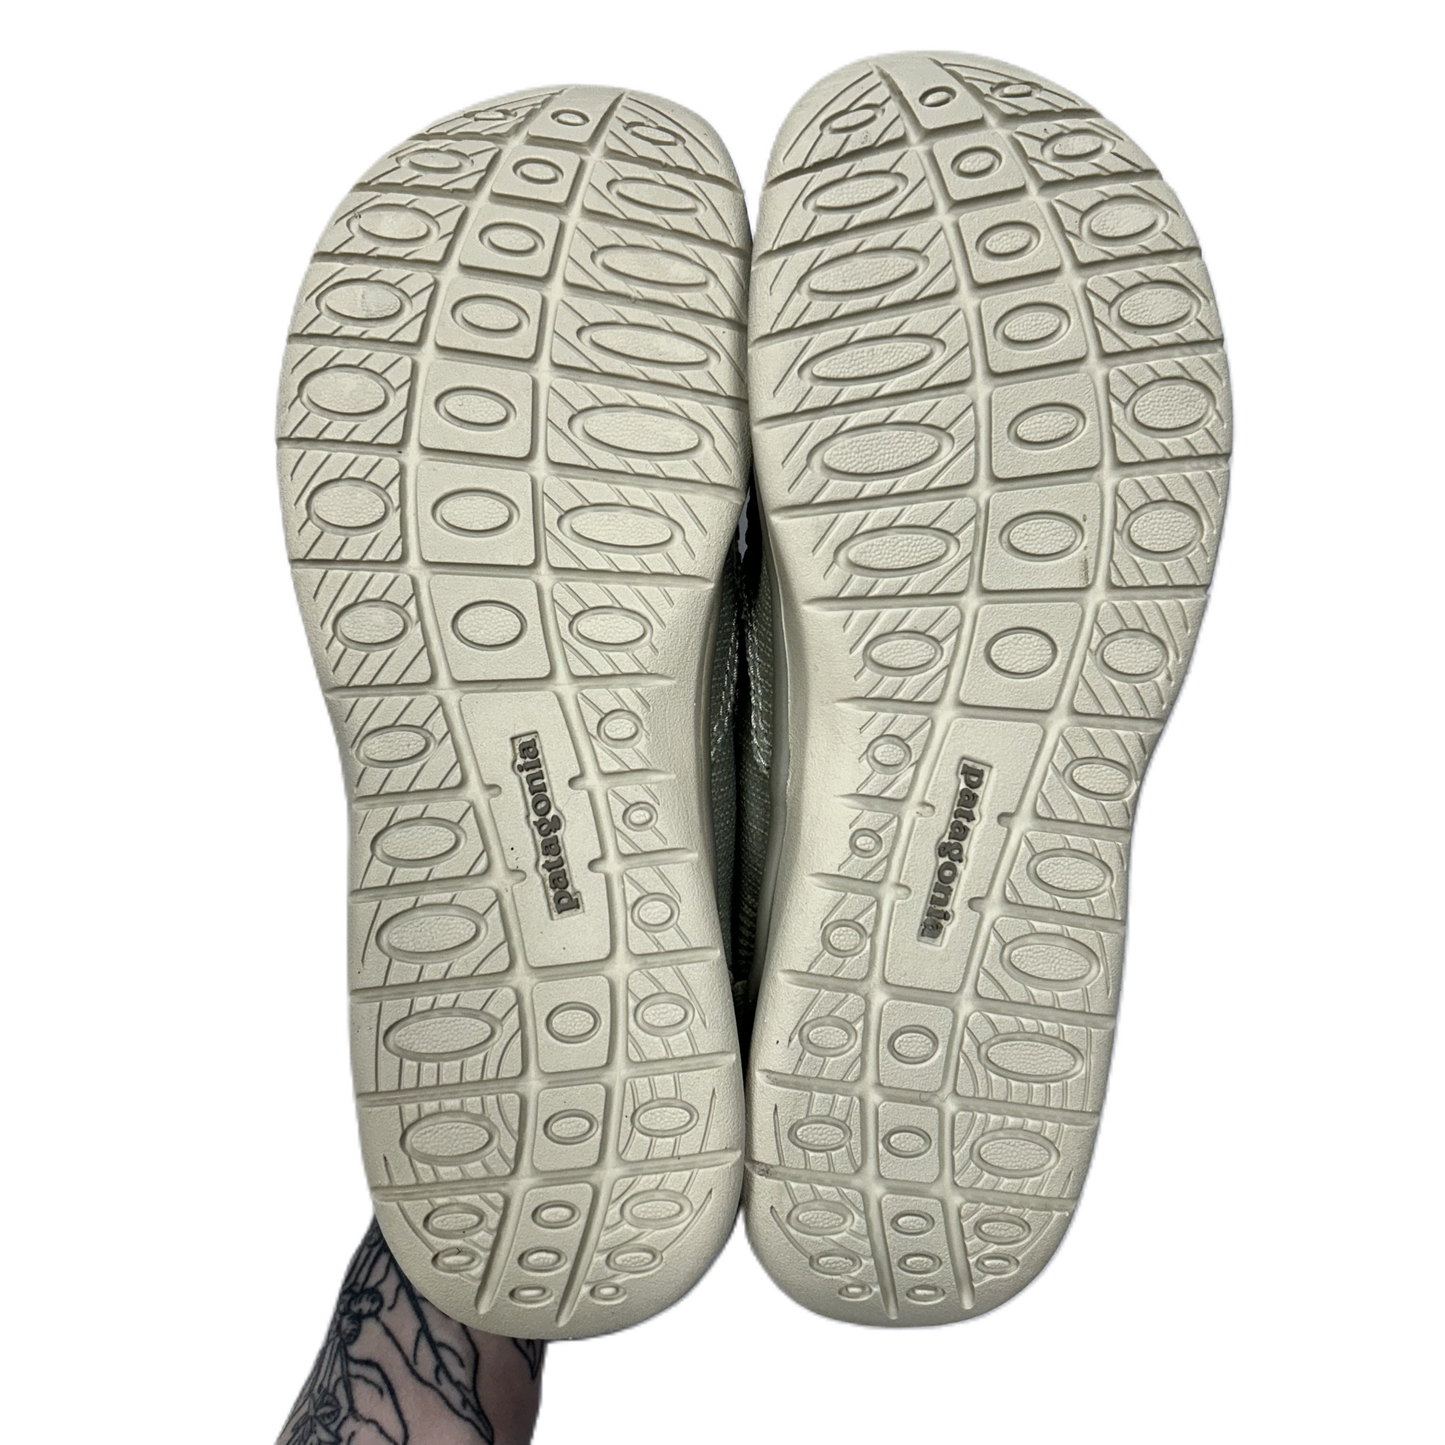 Shoes Flats By Patagonia  Size: 10